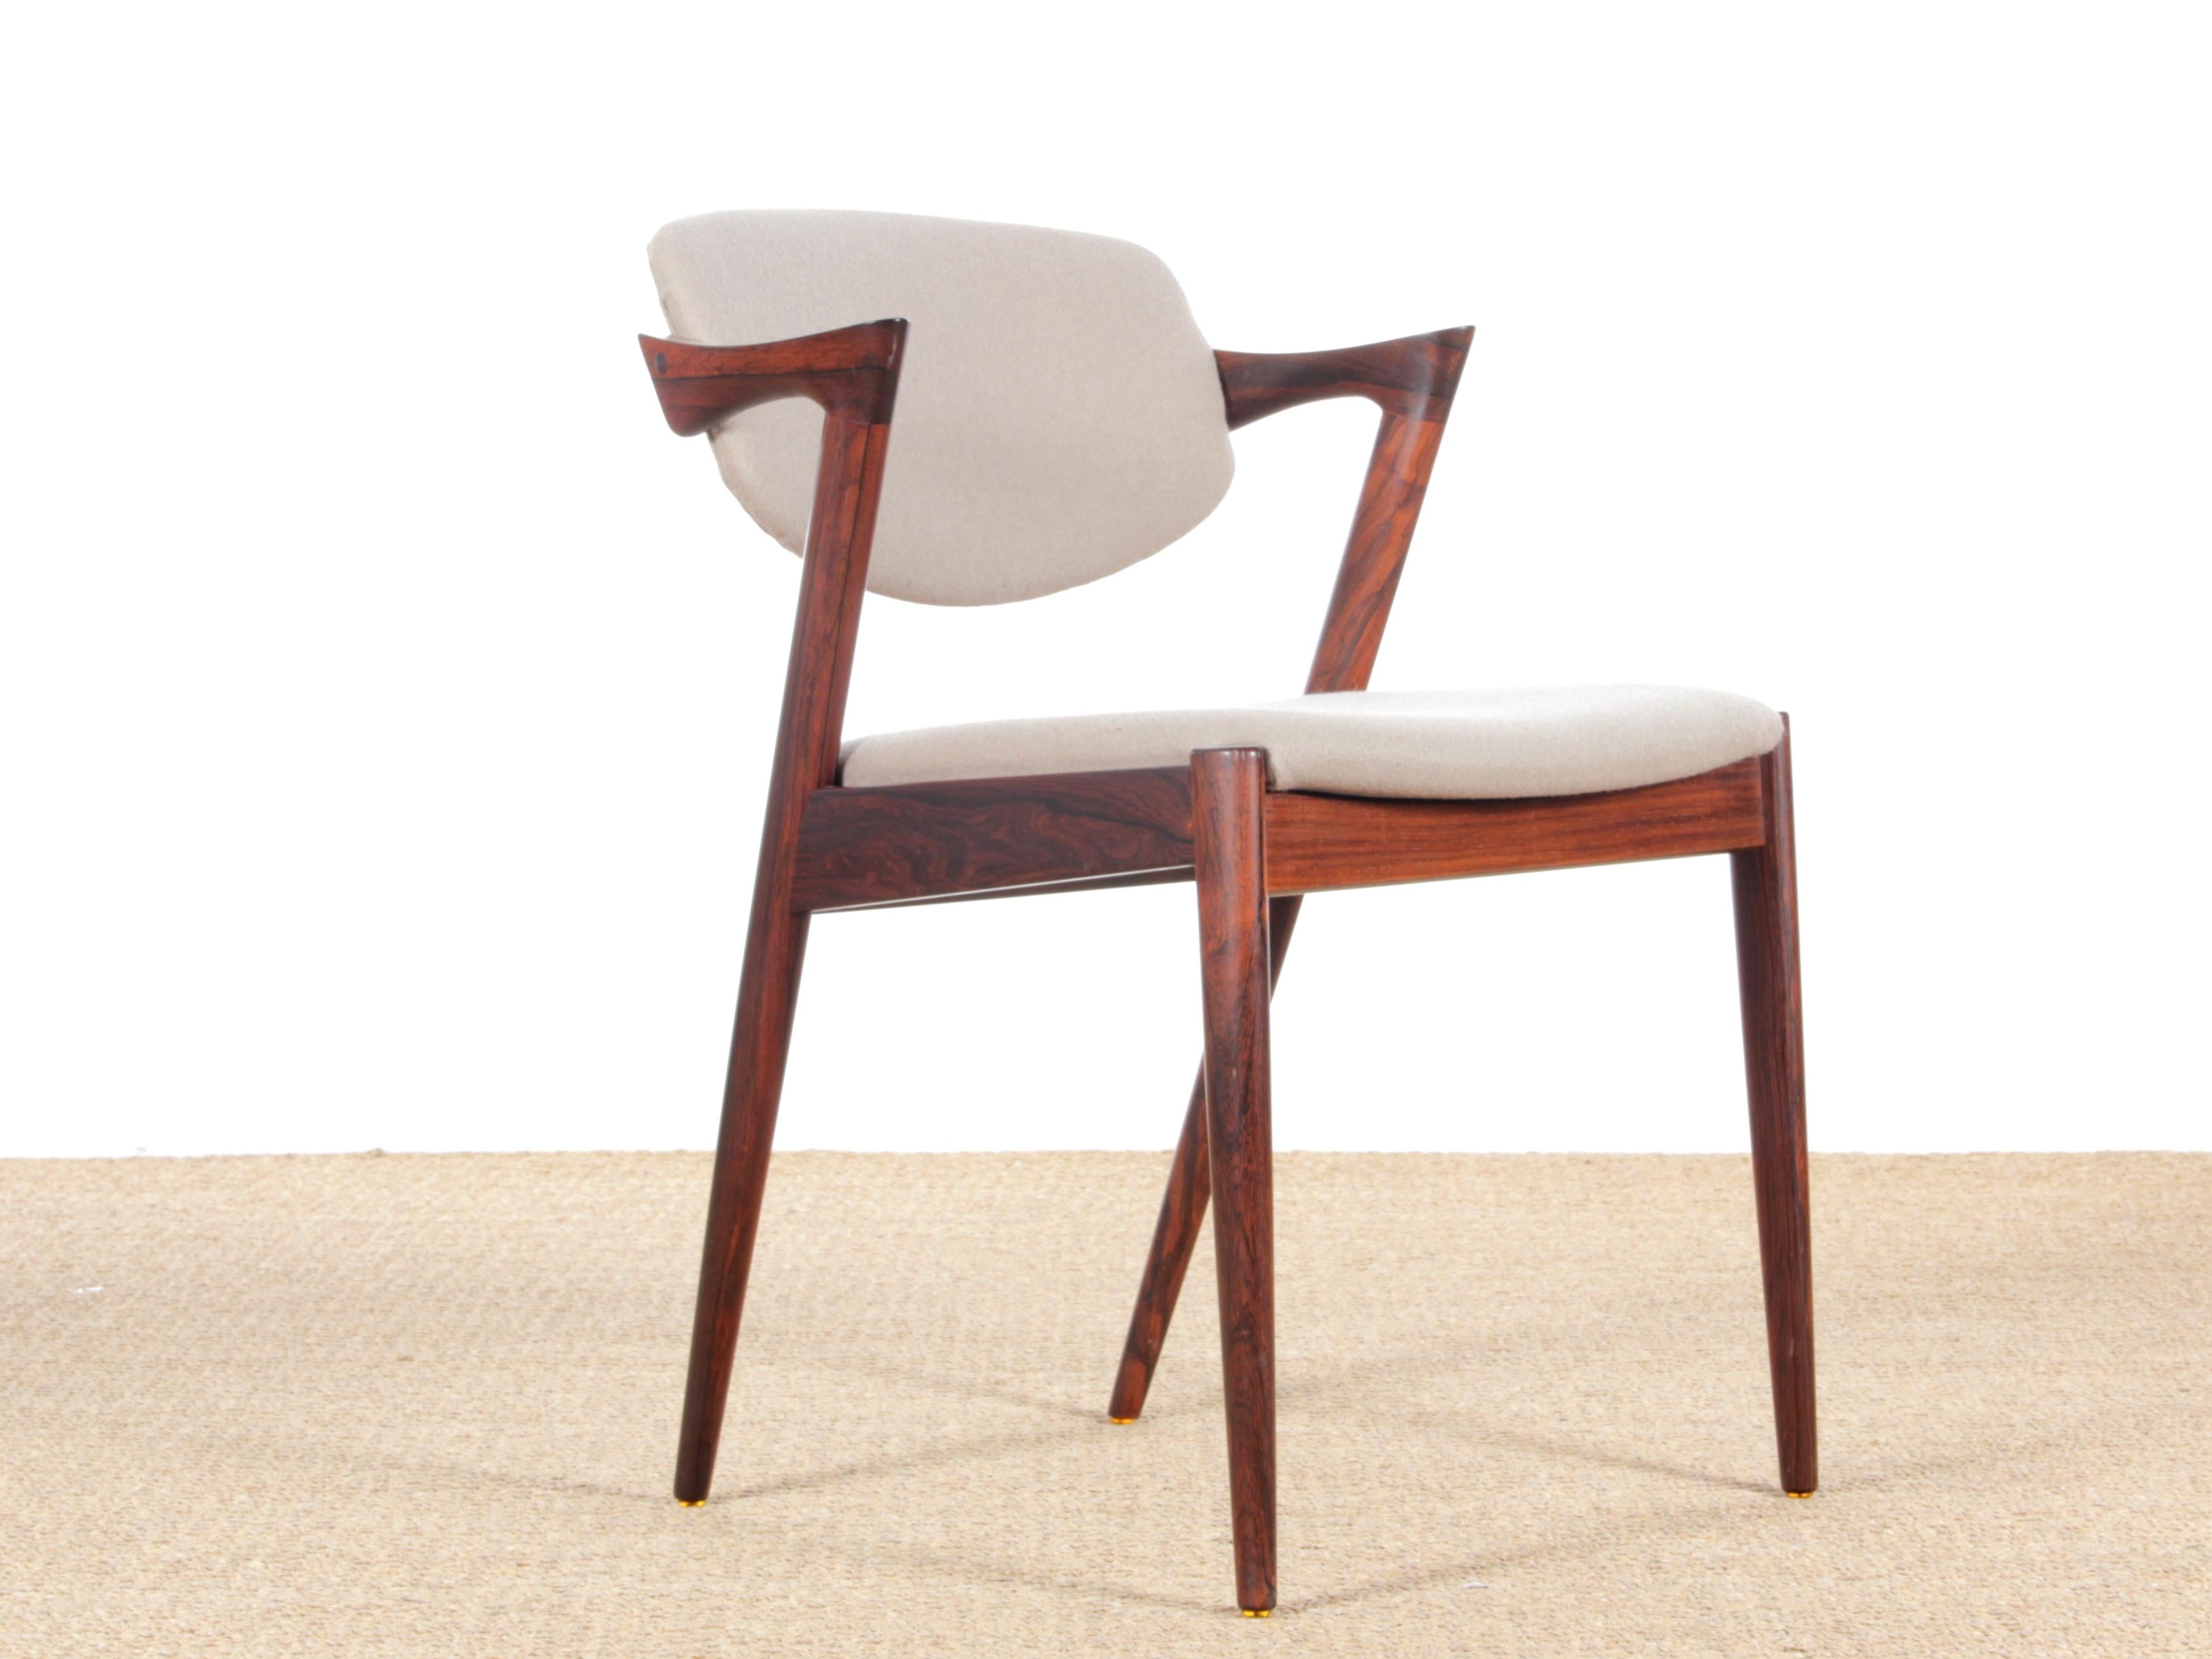 Midcentury Danish set of 8 Kai Kristiansen rosewood chairs, model 42. Newly reupholstered with Camira Blazer fabric color CUZ14. Referenced by the Design Museum Danmark under number RP17674. Bibliography: The furniture fair Denmark 1963, The Danish